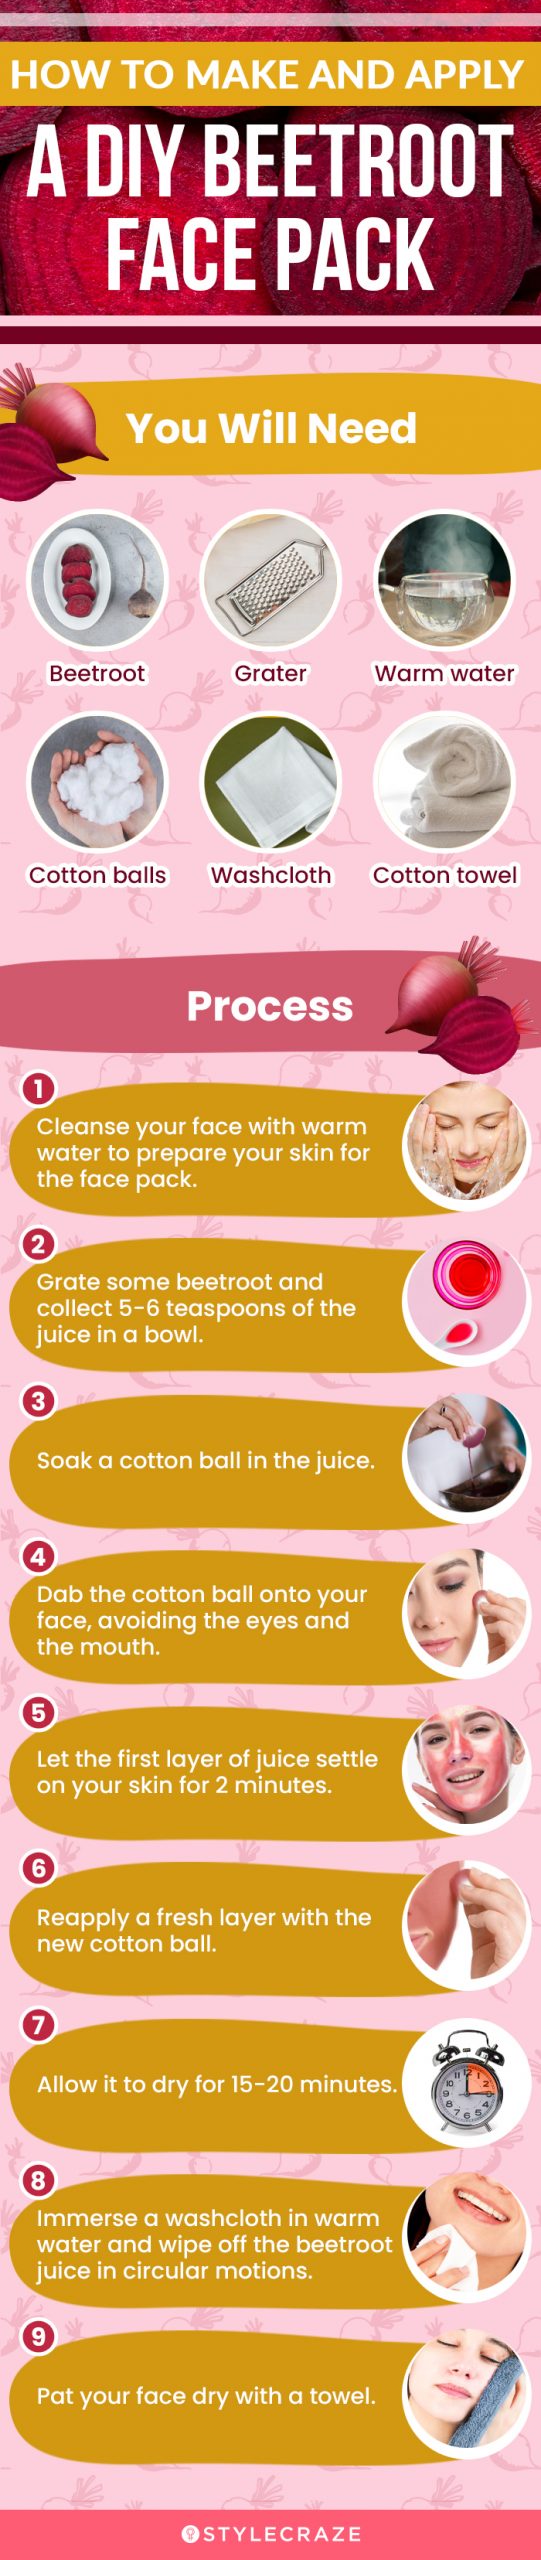 how to make and apply a diy beetroot face pack [infographic]